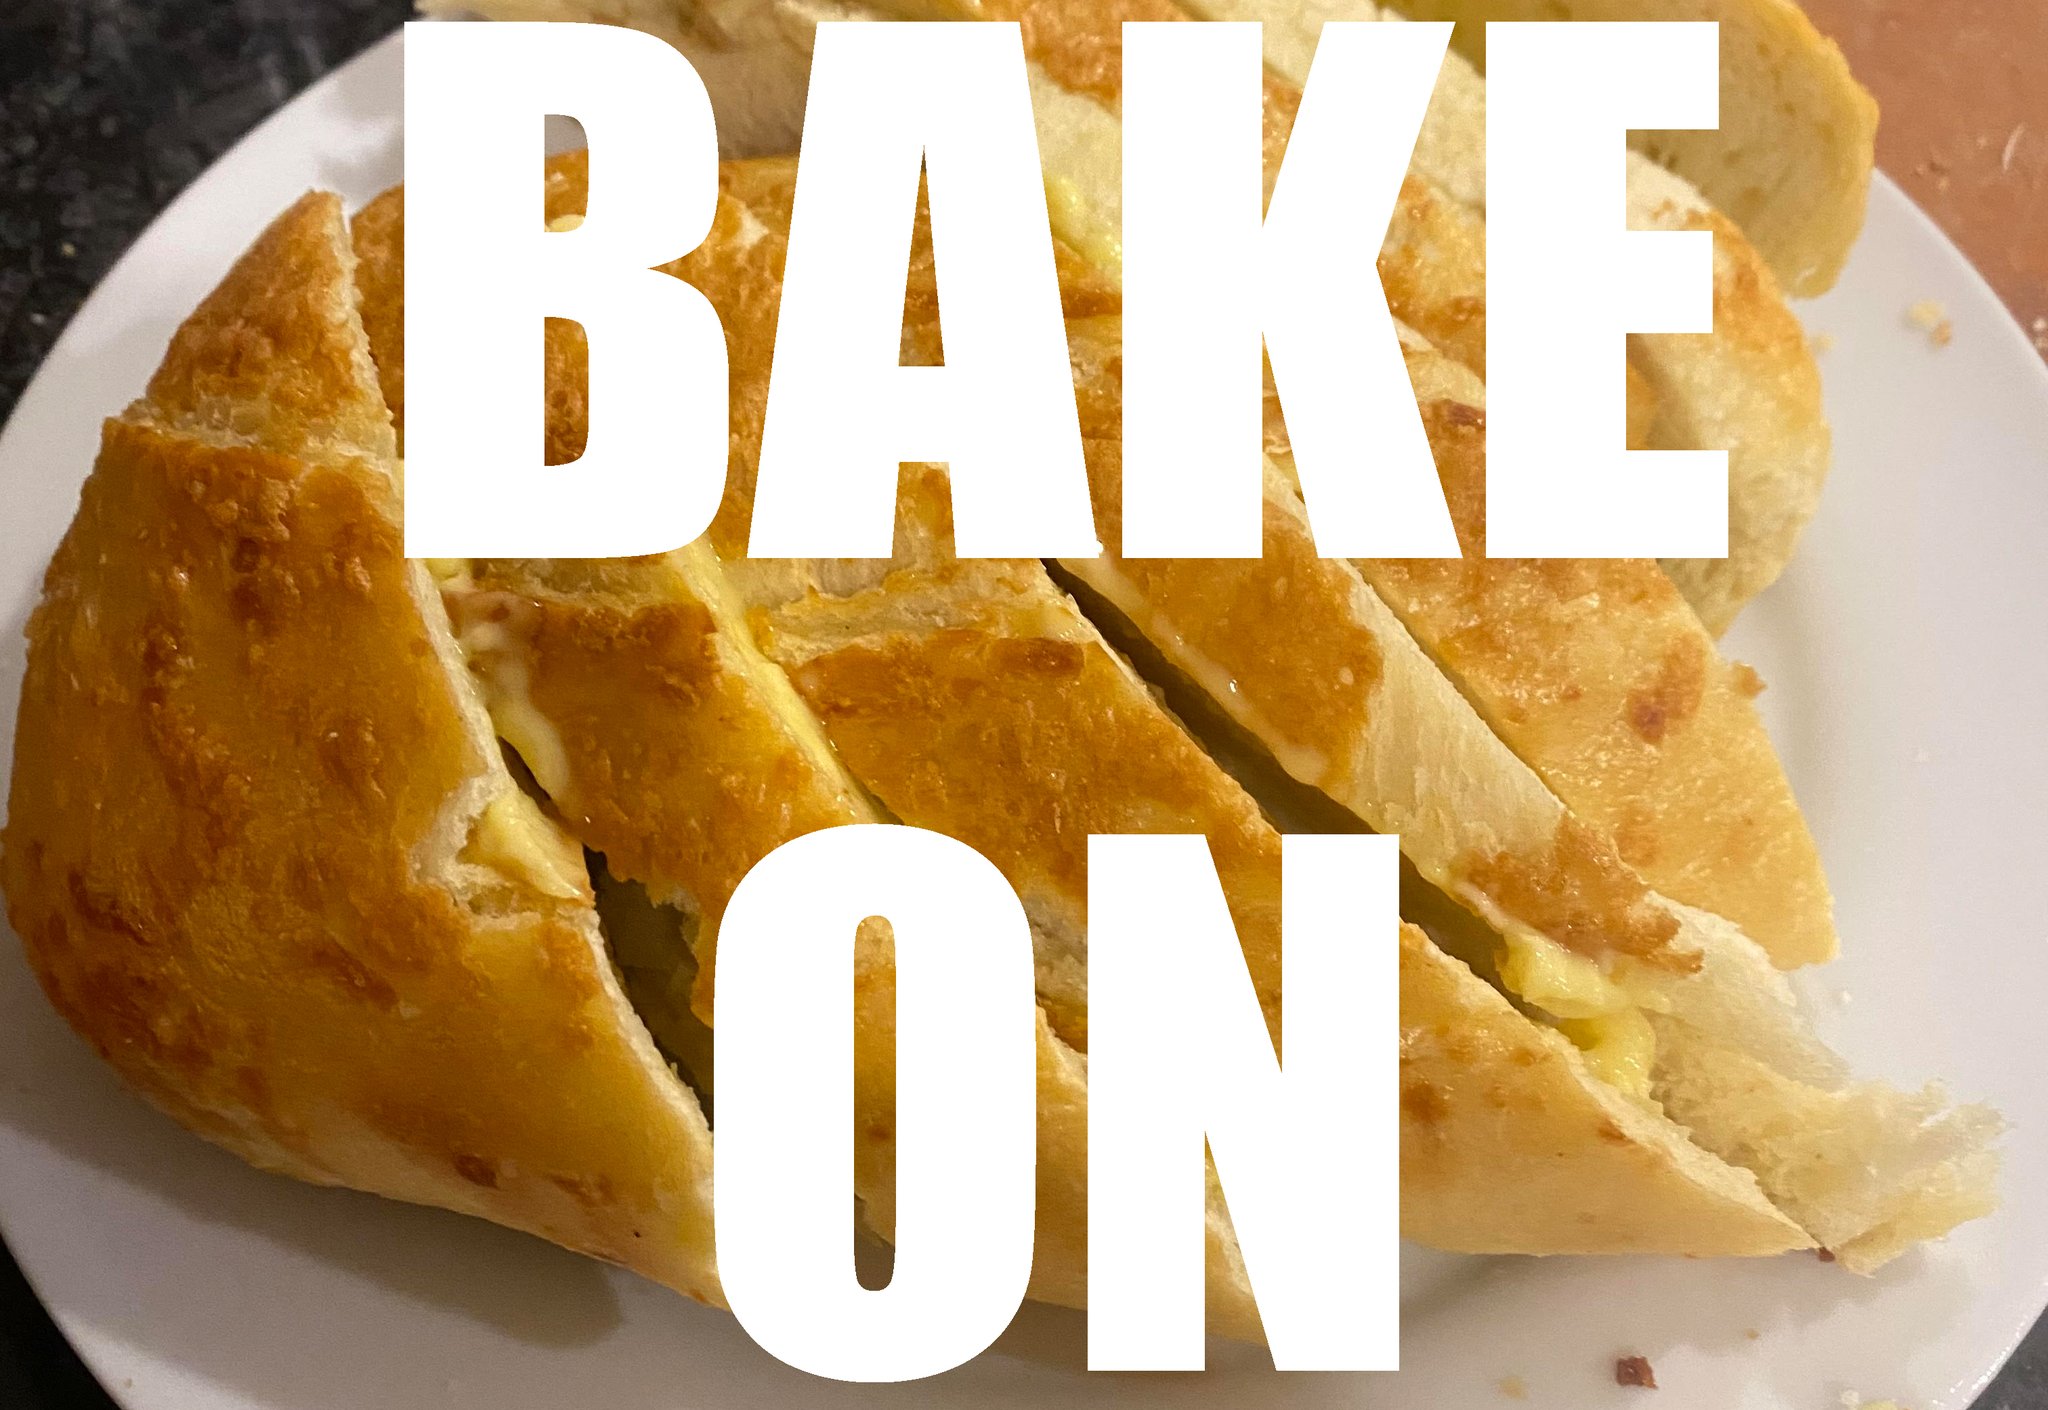 White all-caps text reads” BAKE ON”, superimposed over a photo of sliced bread.